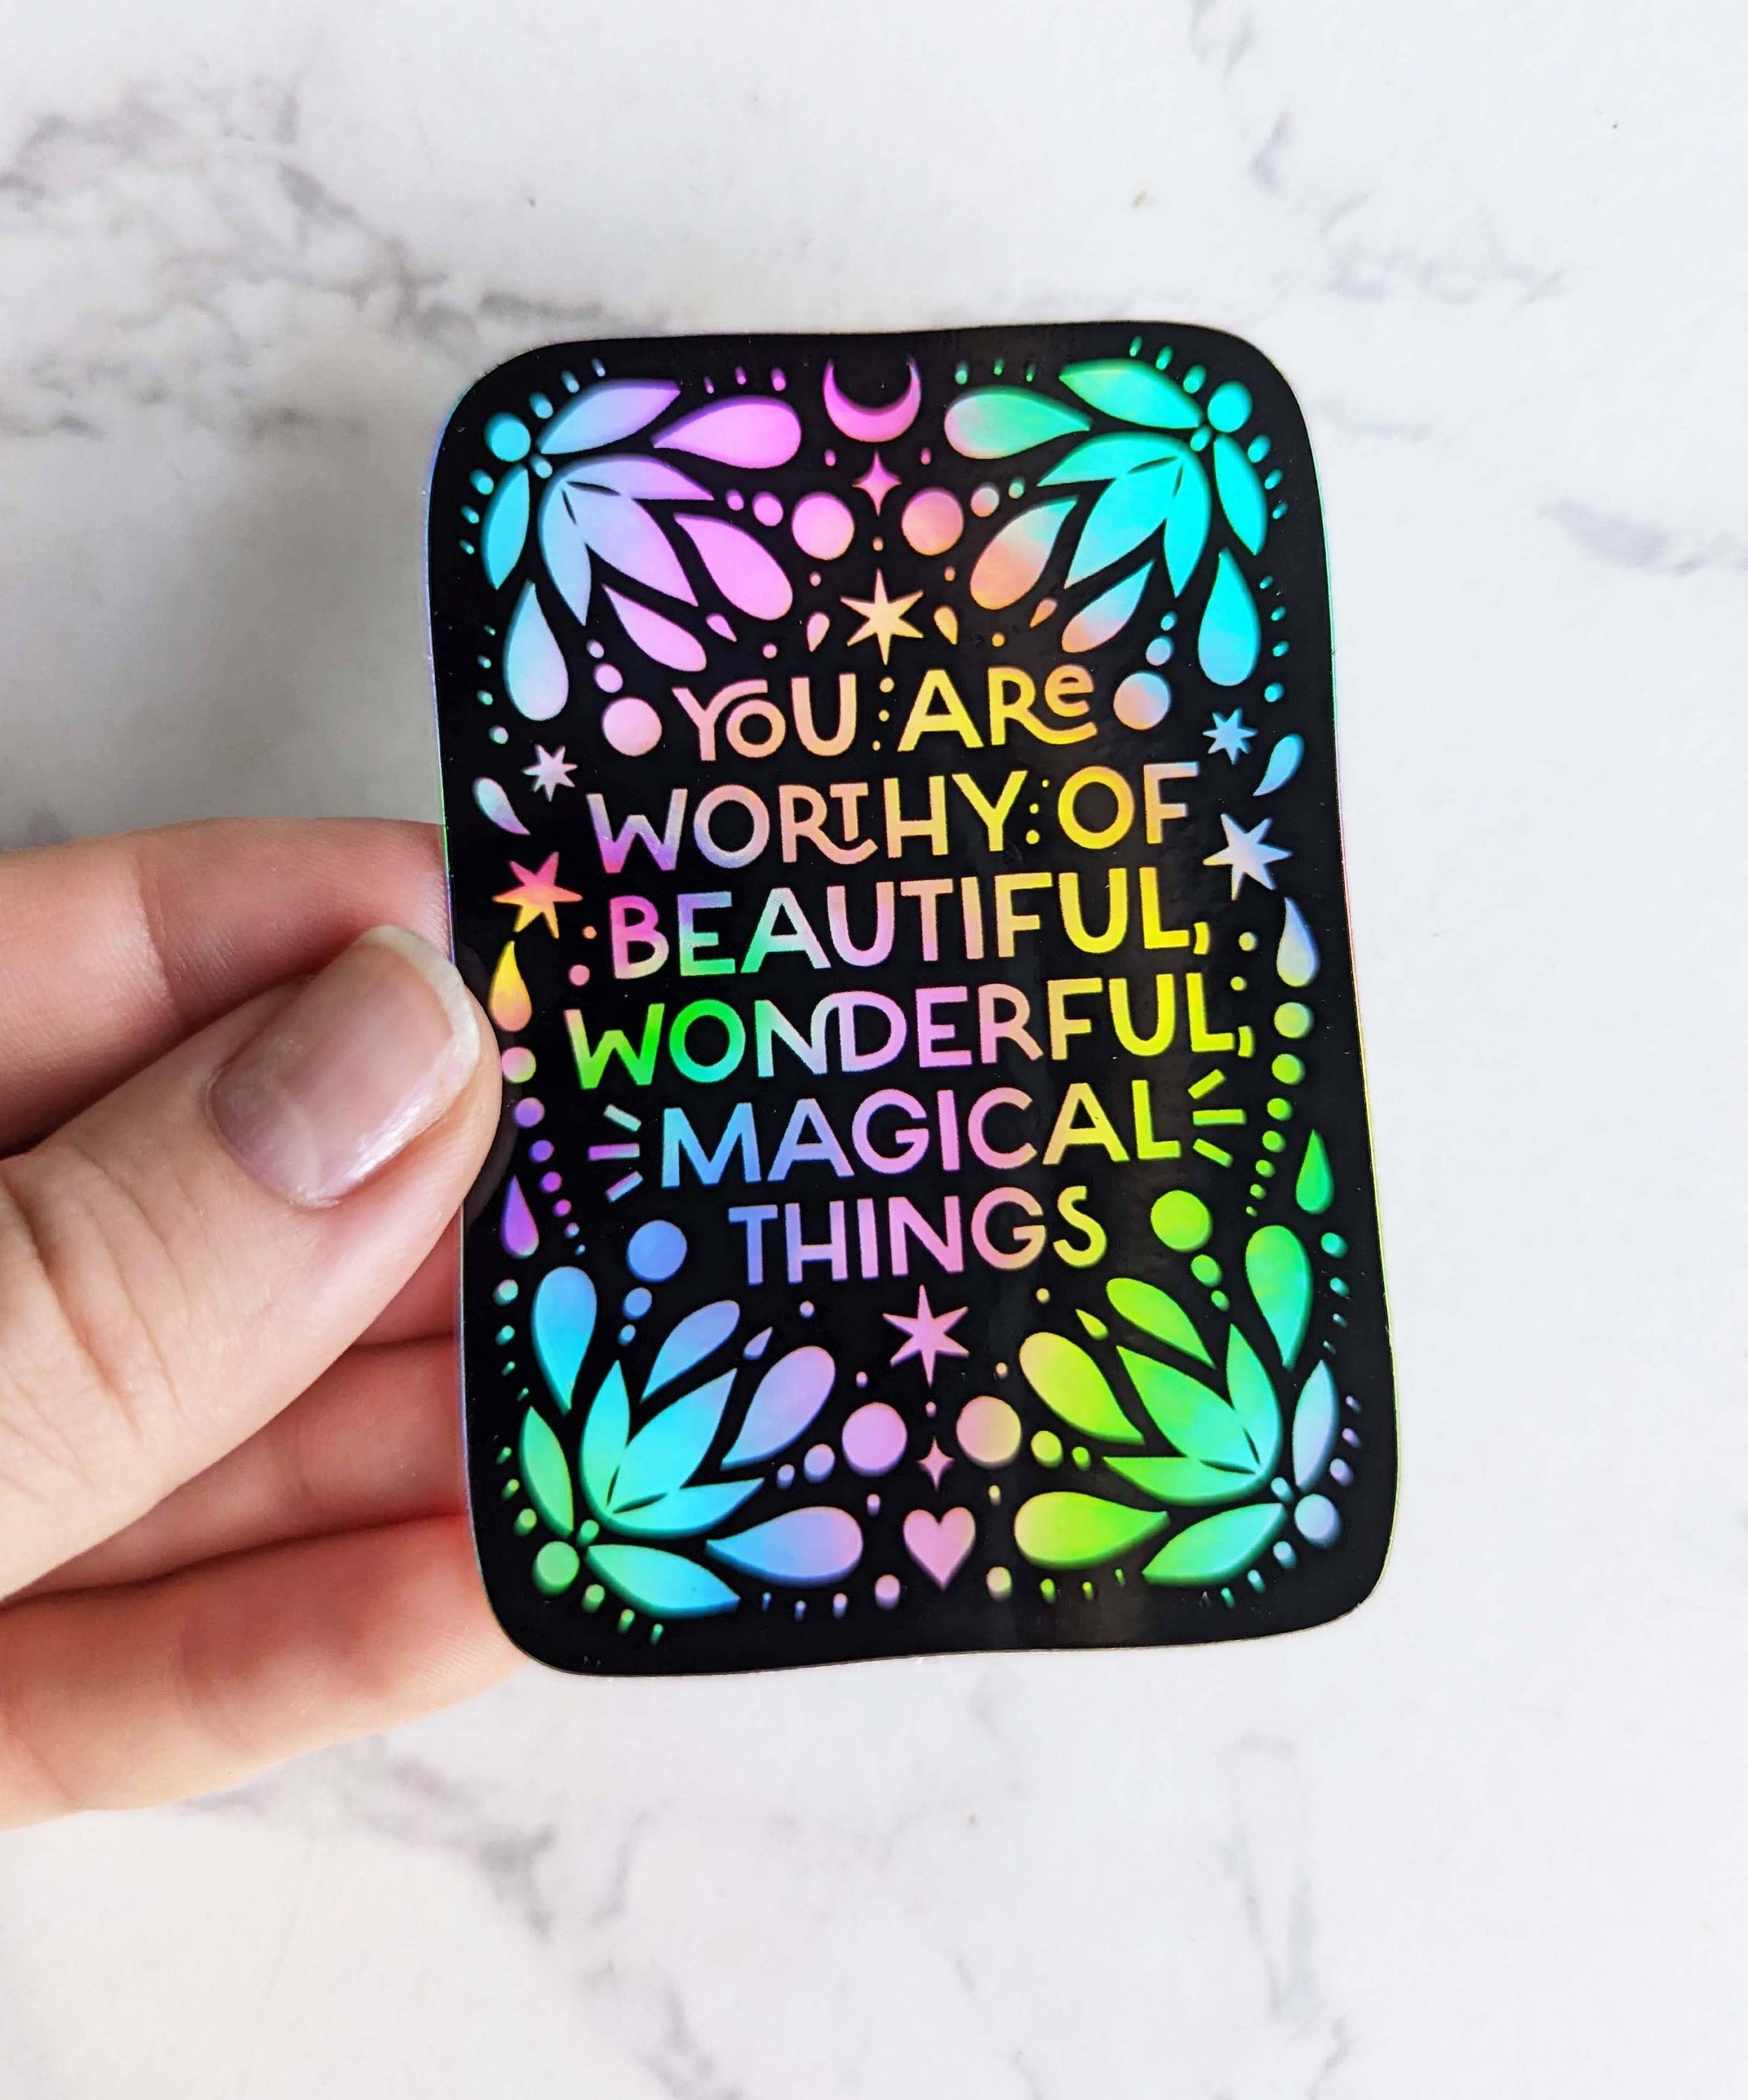 "You are worthy of beautiful, wonderful, magical things" Rainbow Sticker